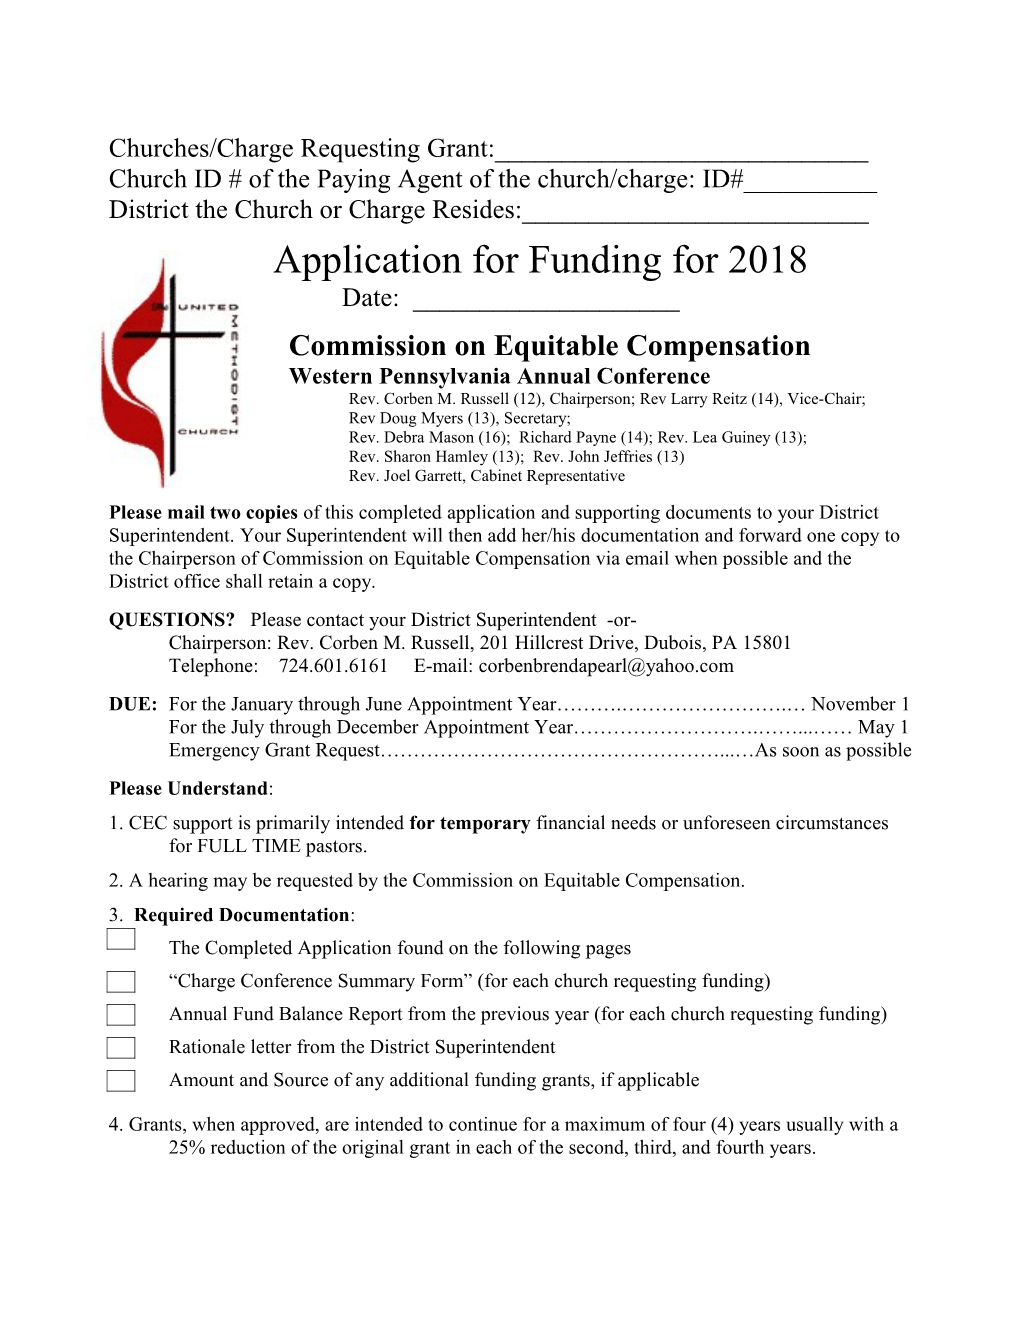 Commission on Equitable Compensation